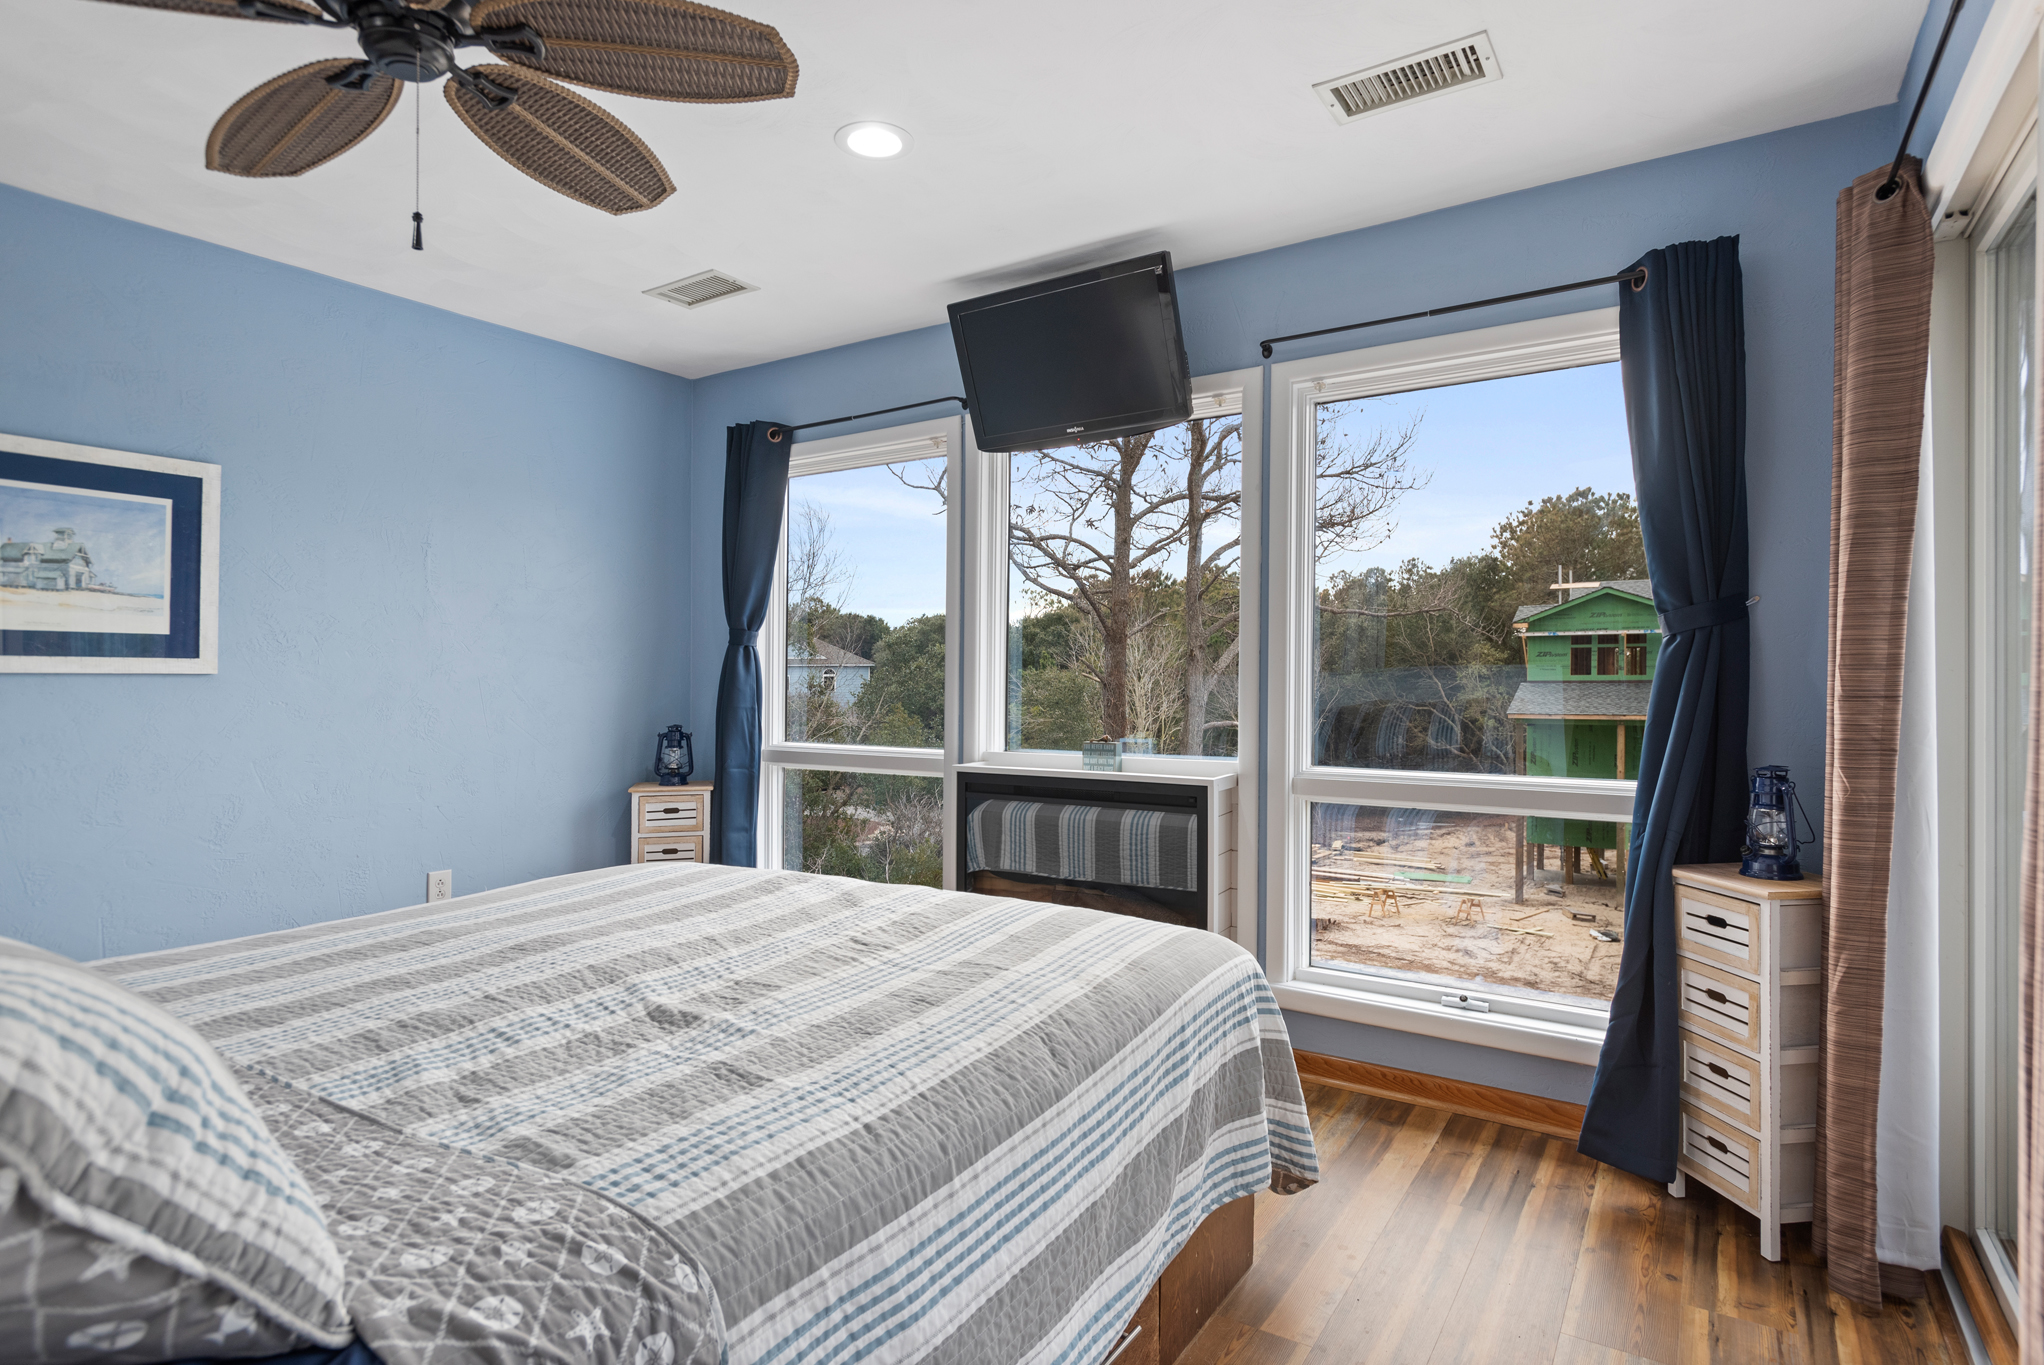 M939: Abby Gale l Top Level Bedroom 4